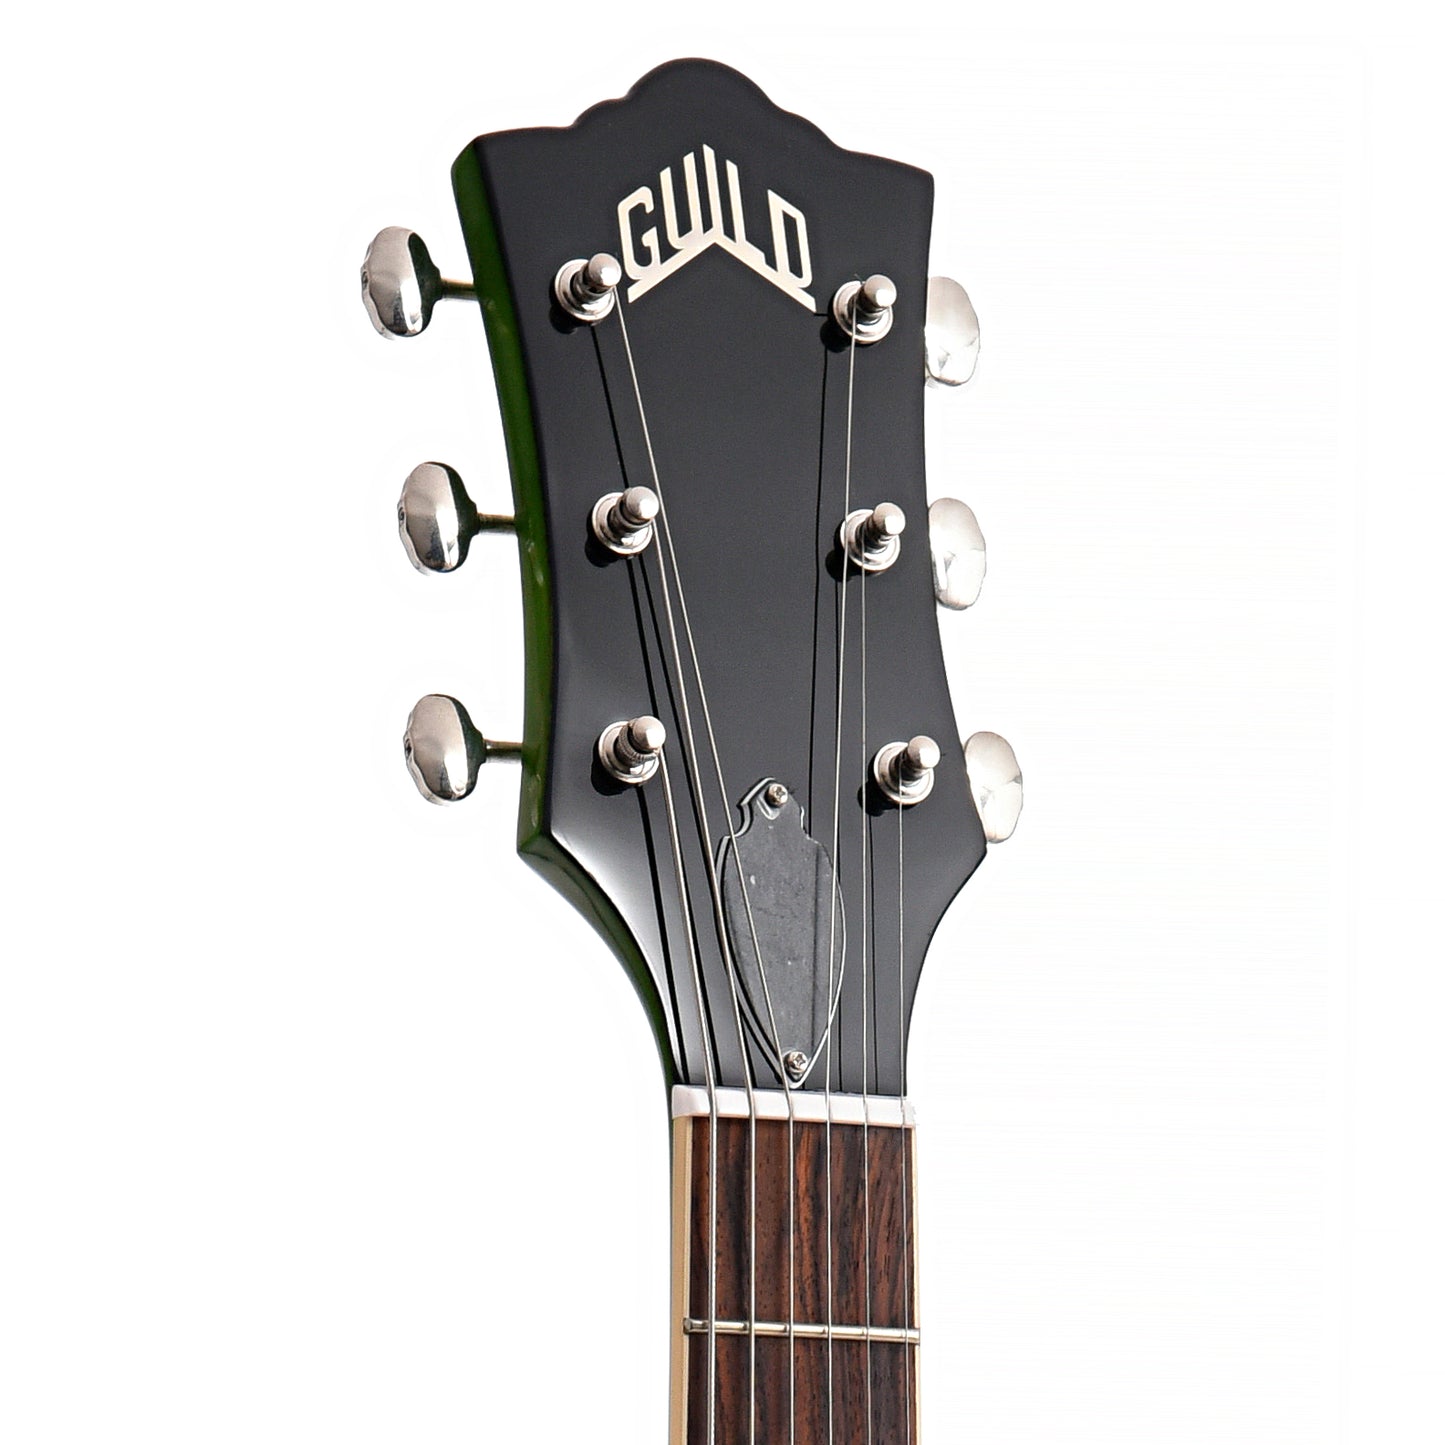 Image 6 of Guild Starfire I Double Cutaway Semi-Hollow Body Guitar with Vibrato, Emerald Green - SKU# GSF1DCV-GRN : Product Type Hollow Body Electric Guitars : Elderly Instruments